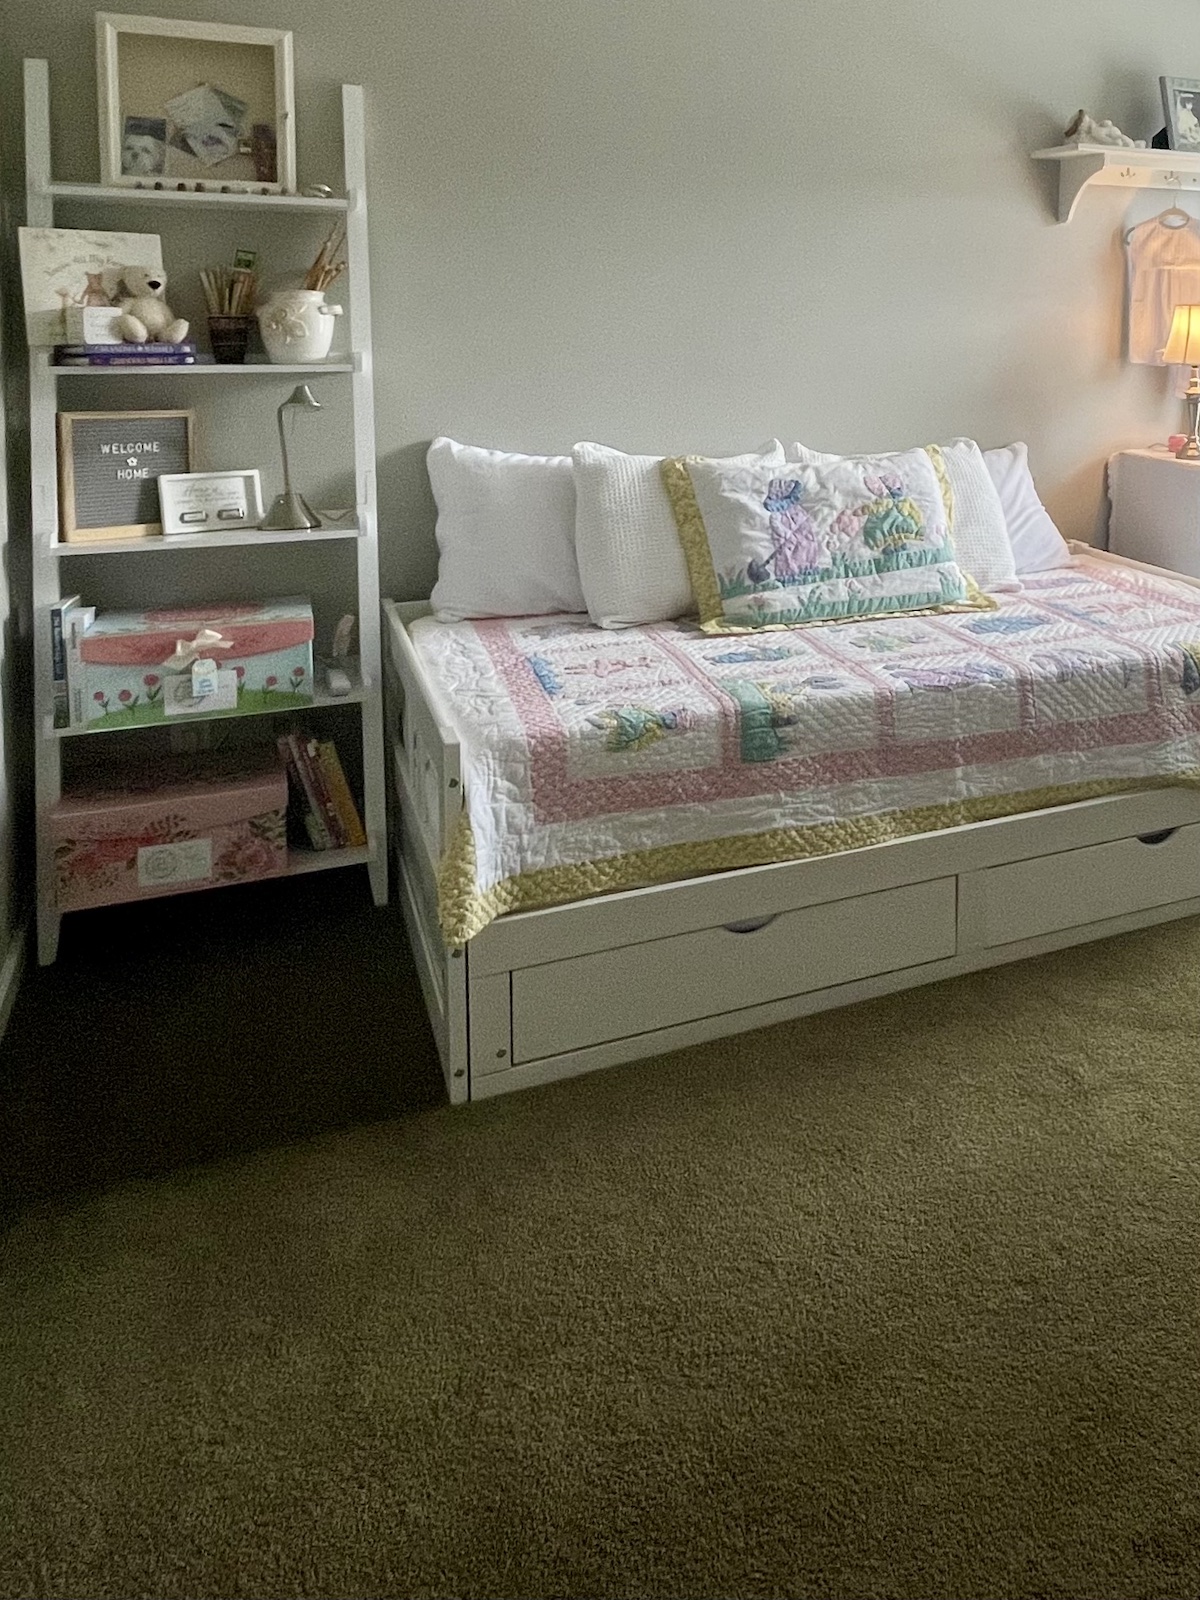 Sewing Space Tutorial: After Furniture